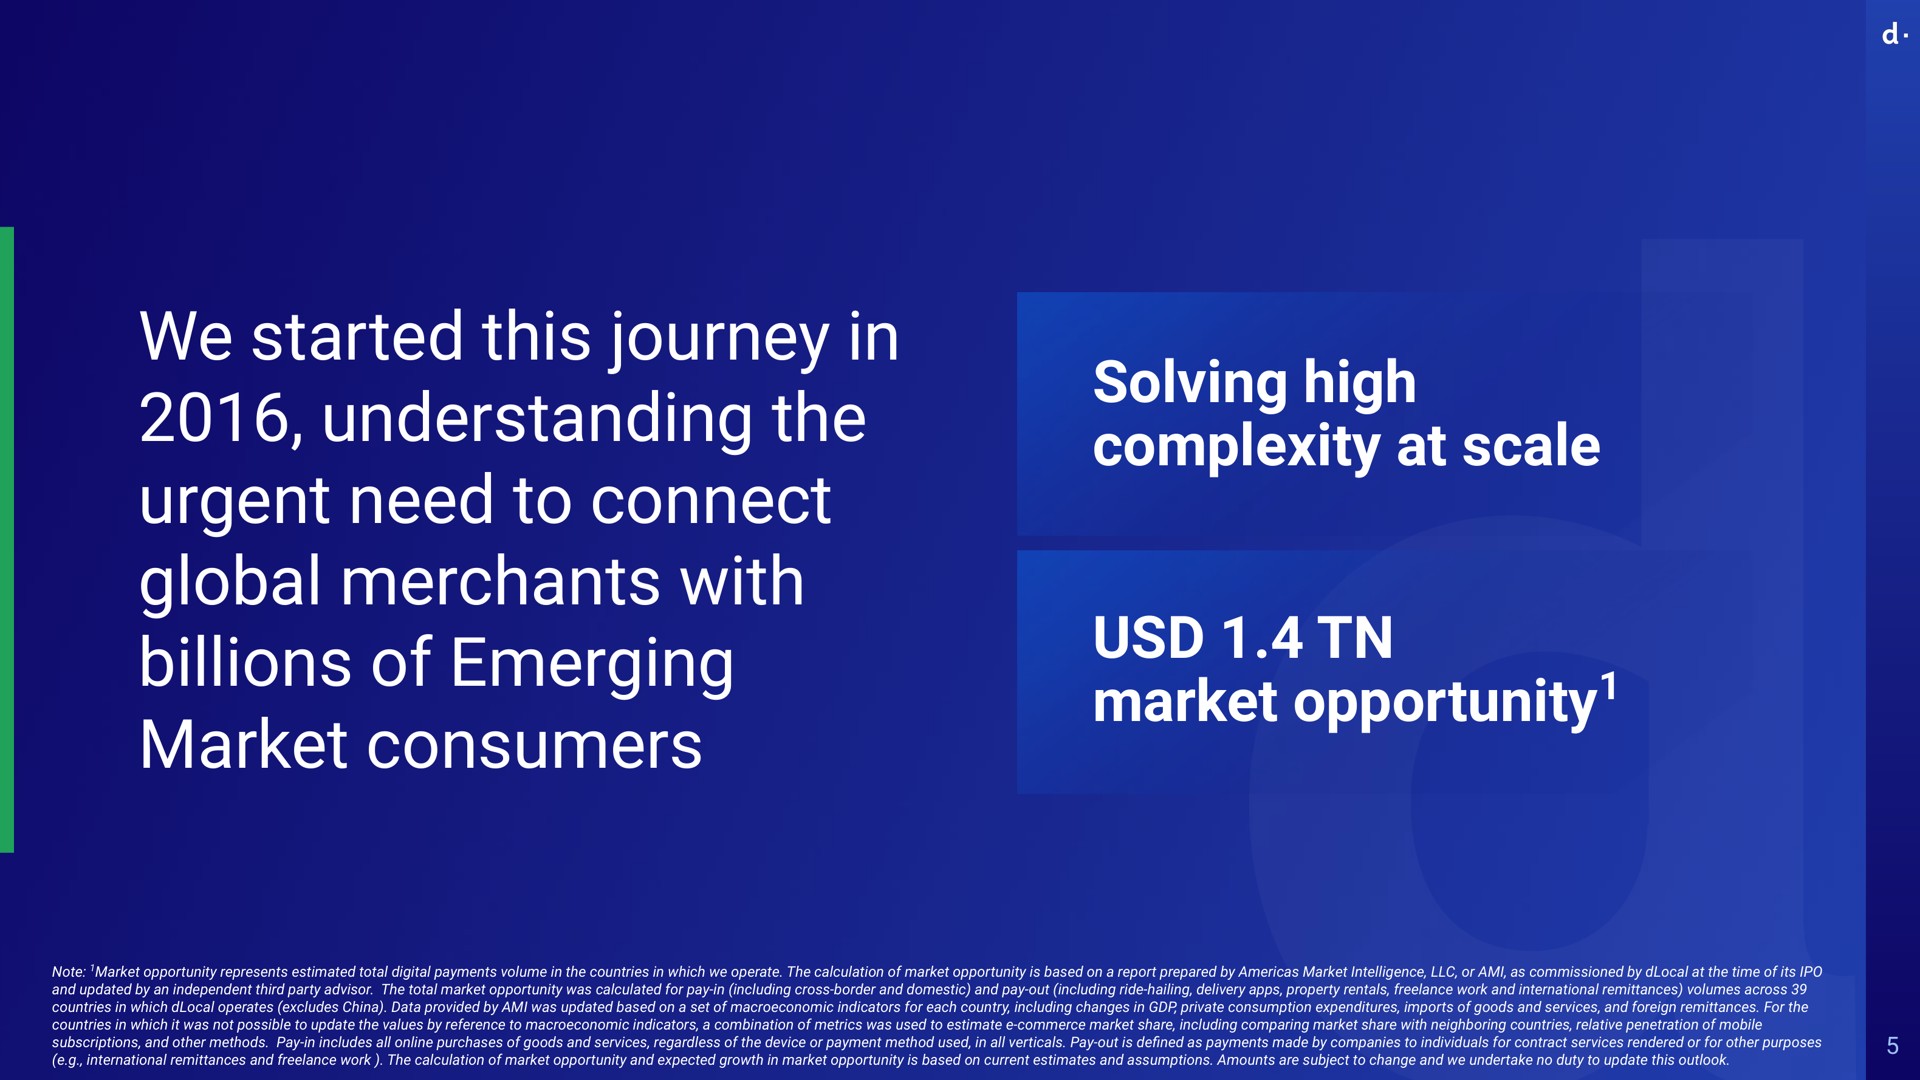 we started this journey in understanding the urgent need to connect global merchants with billions of emerging market consumers solving high complexity at scale market opportunity sie note opportunity represents estimated total digital payments volume countries which operate calculation opportunity is based on a report prepared by intelligence or ami as commissioned by time its and updated by an independent third party advisor total opportunity was calculated for pay in including cross border and domestic and pay out including ride hailing delivery property rentals work and international remittances volumes across countries which operates excludes china data provided by ami was updated based on a set indicators for each country including changes private consumption expenditures imports goods and services and foreign remittances for countries which it was not possible update values by reference indicators a combination metrics was used estimate commerce share including comparing share neighboring countries relative penetration mobile subscriptions and other methods pay in includes all purchases goods and services regardless device or payment method used all verticals pay out is defined as payments made by companies individuals for contract services rendered or for other purposes international remittances and work calculation opportunity and expected growth opportunity is based on current estimates and assumptions amounts are subject change and undertake no duty update outlook | dLocal